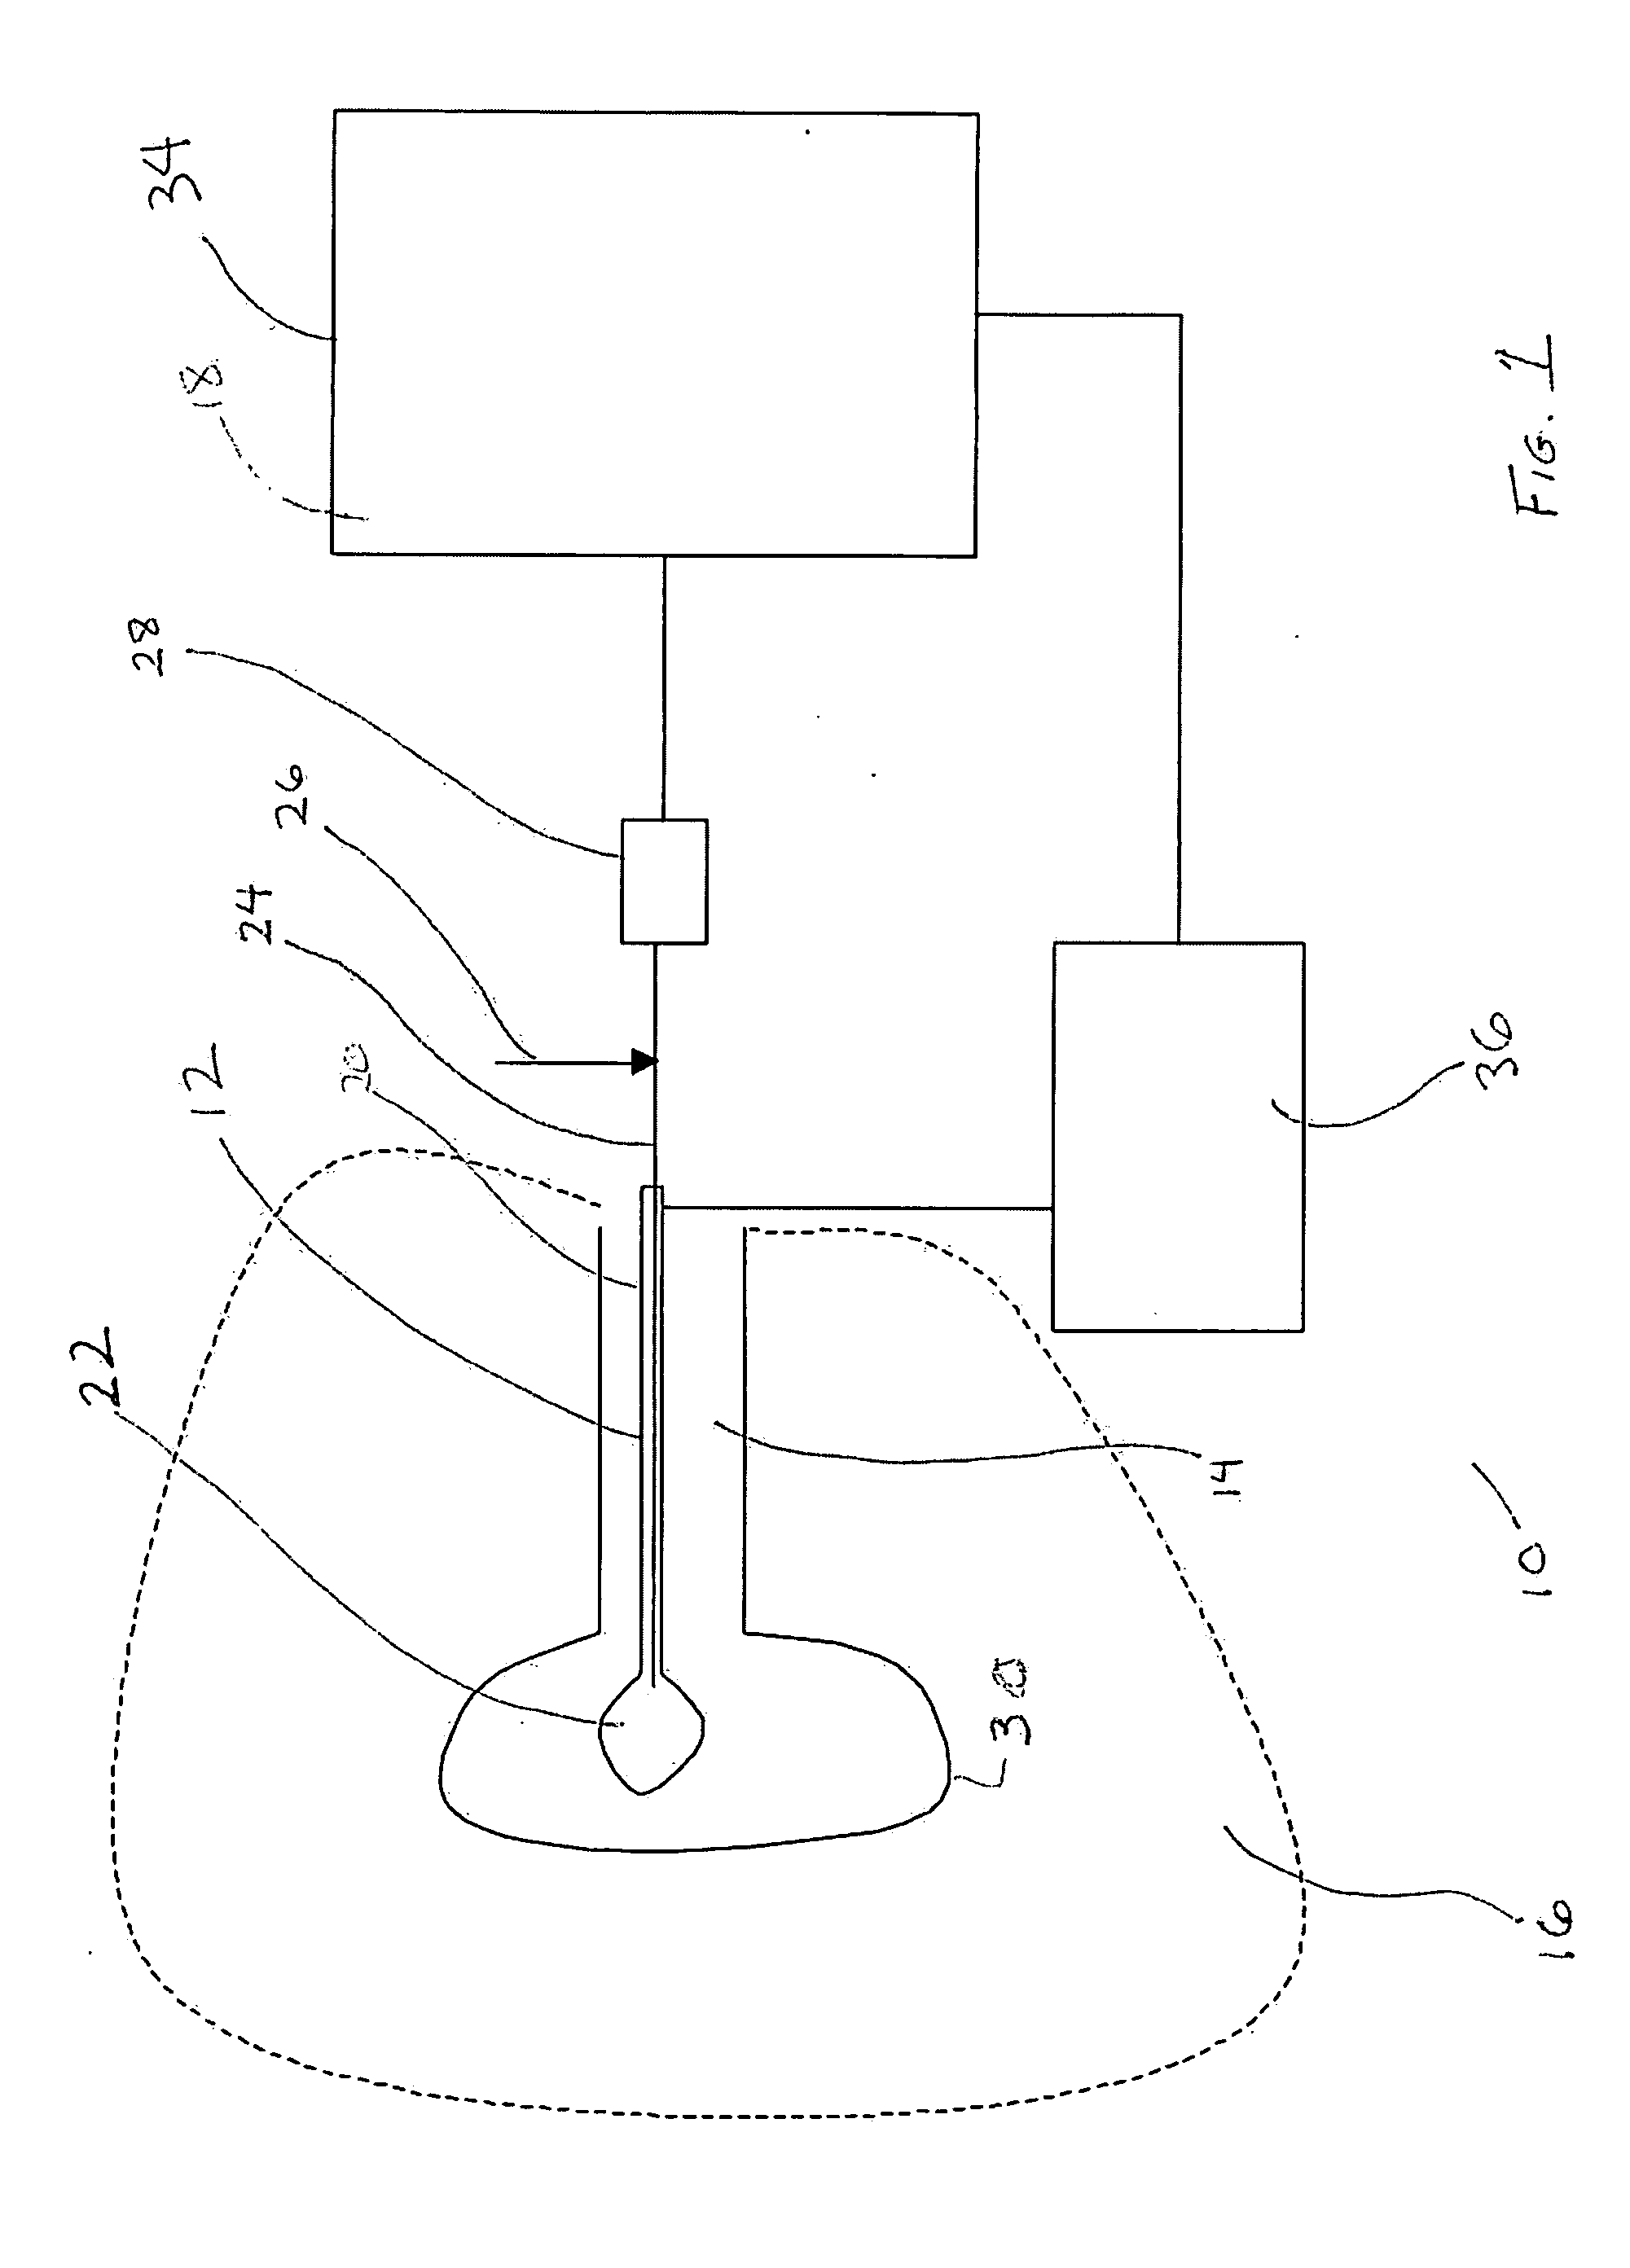 Method for obtaining and displaying urethral pressure profiles